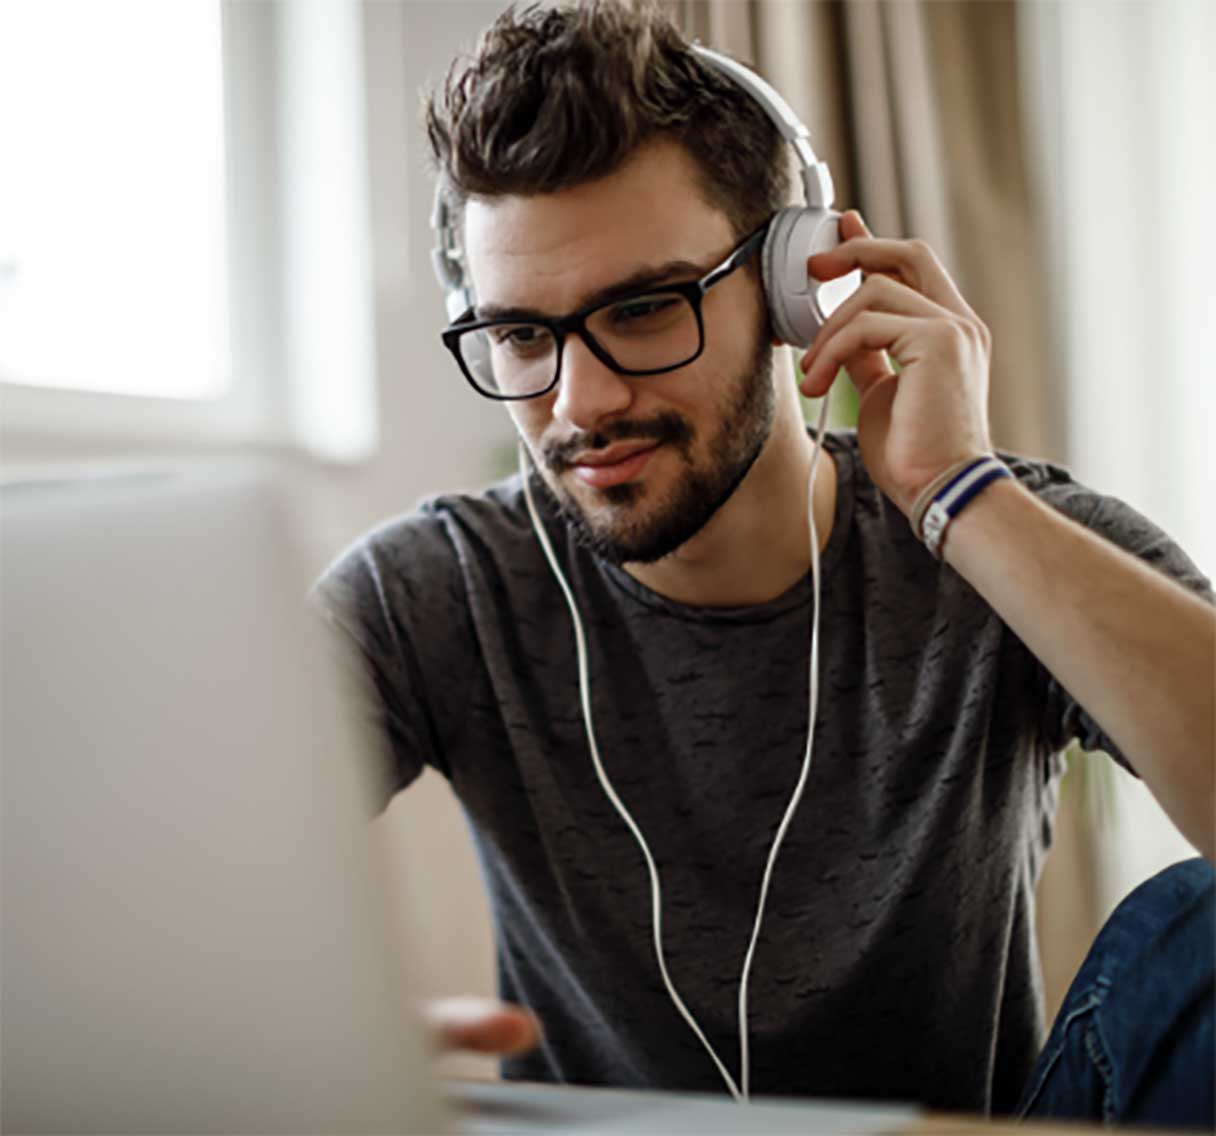 Man in glasses working on laptop with headphones on